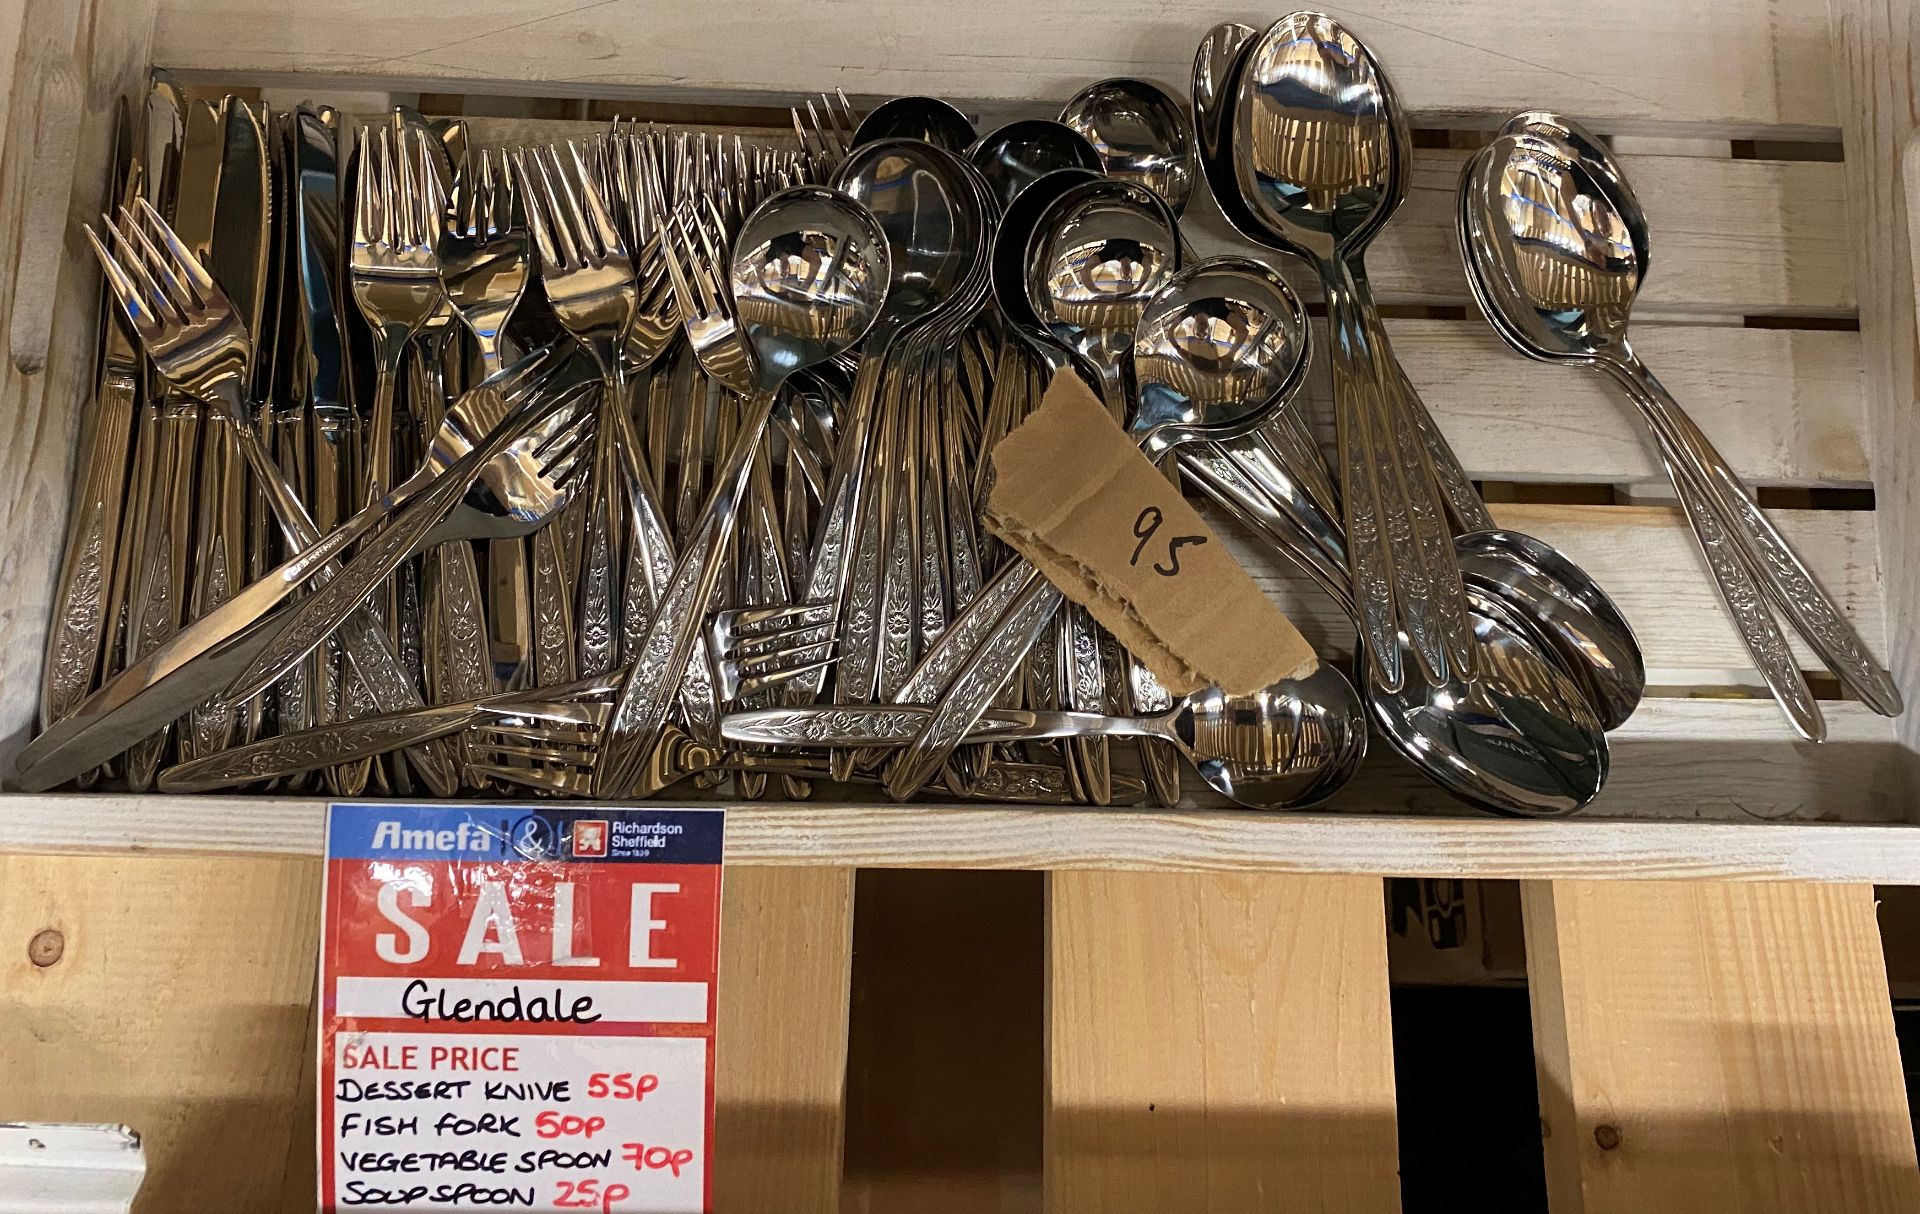 Contents to tray - 95 pieces of Glendale etc assorted cutlery